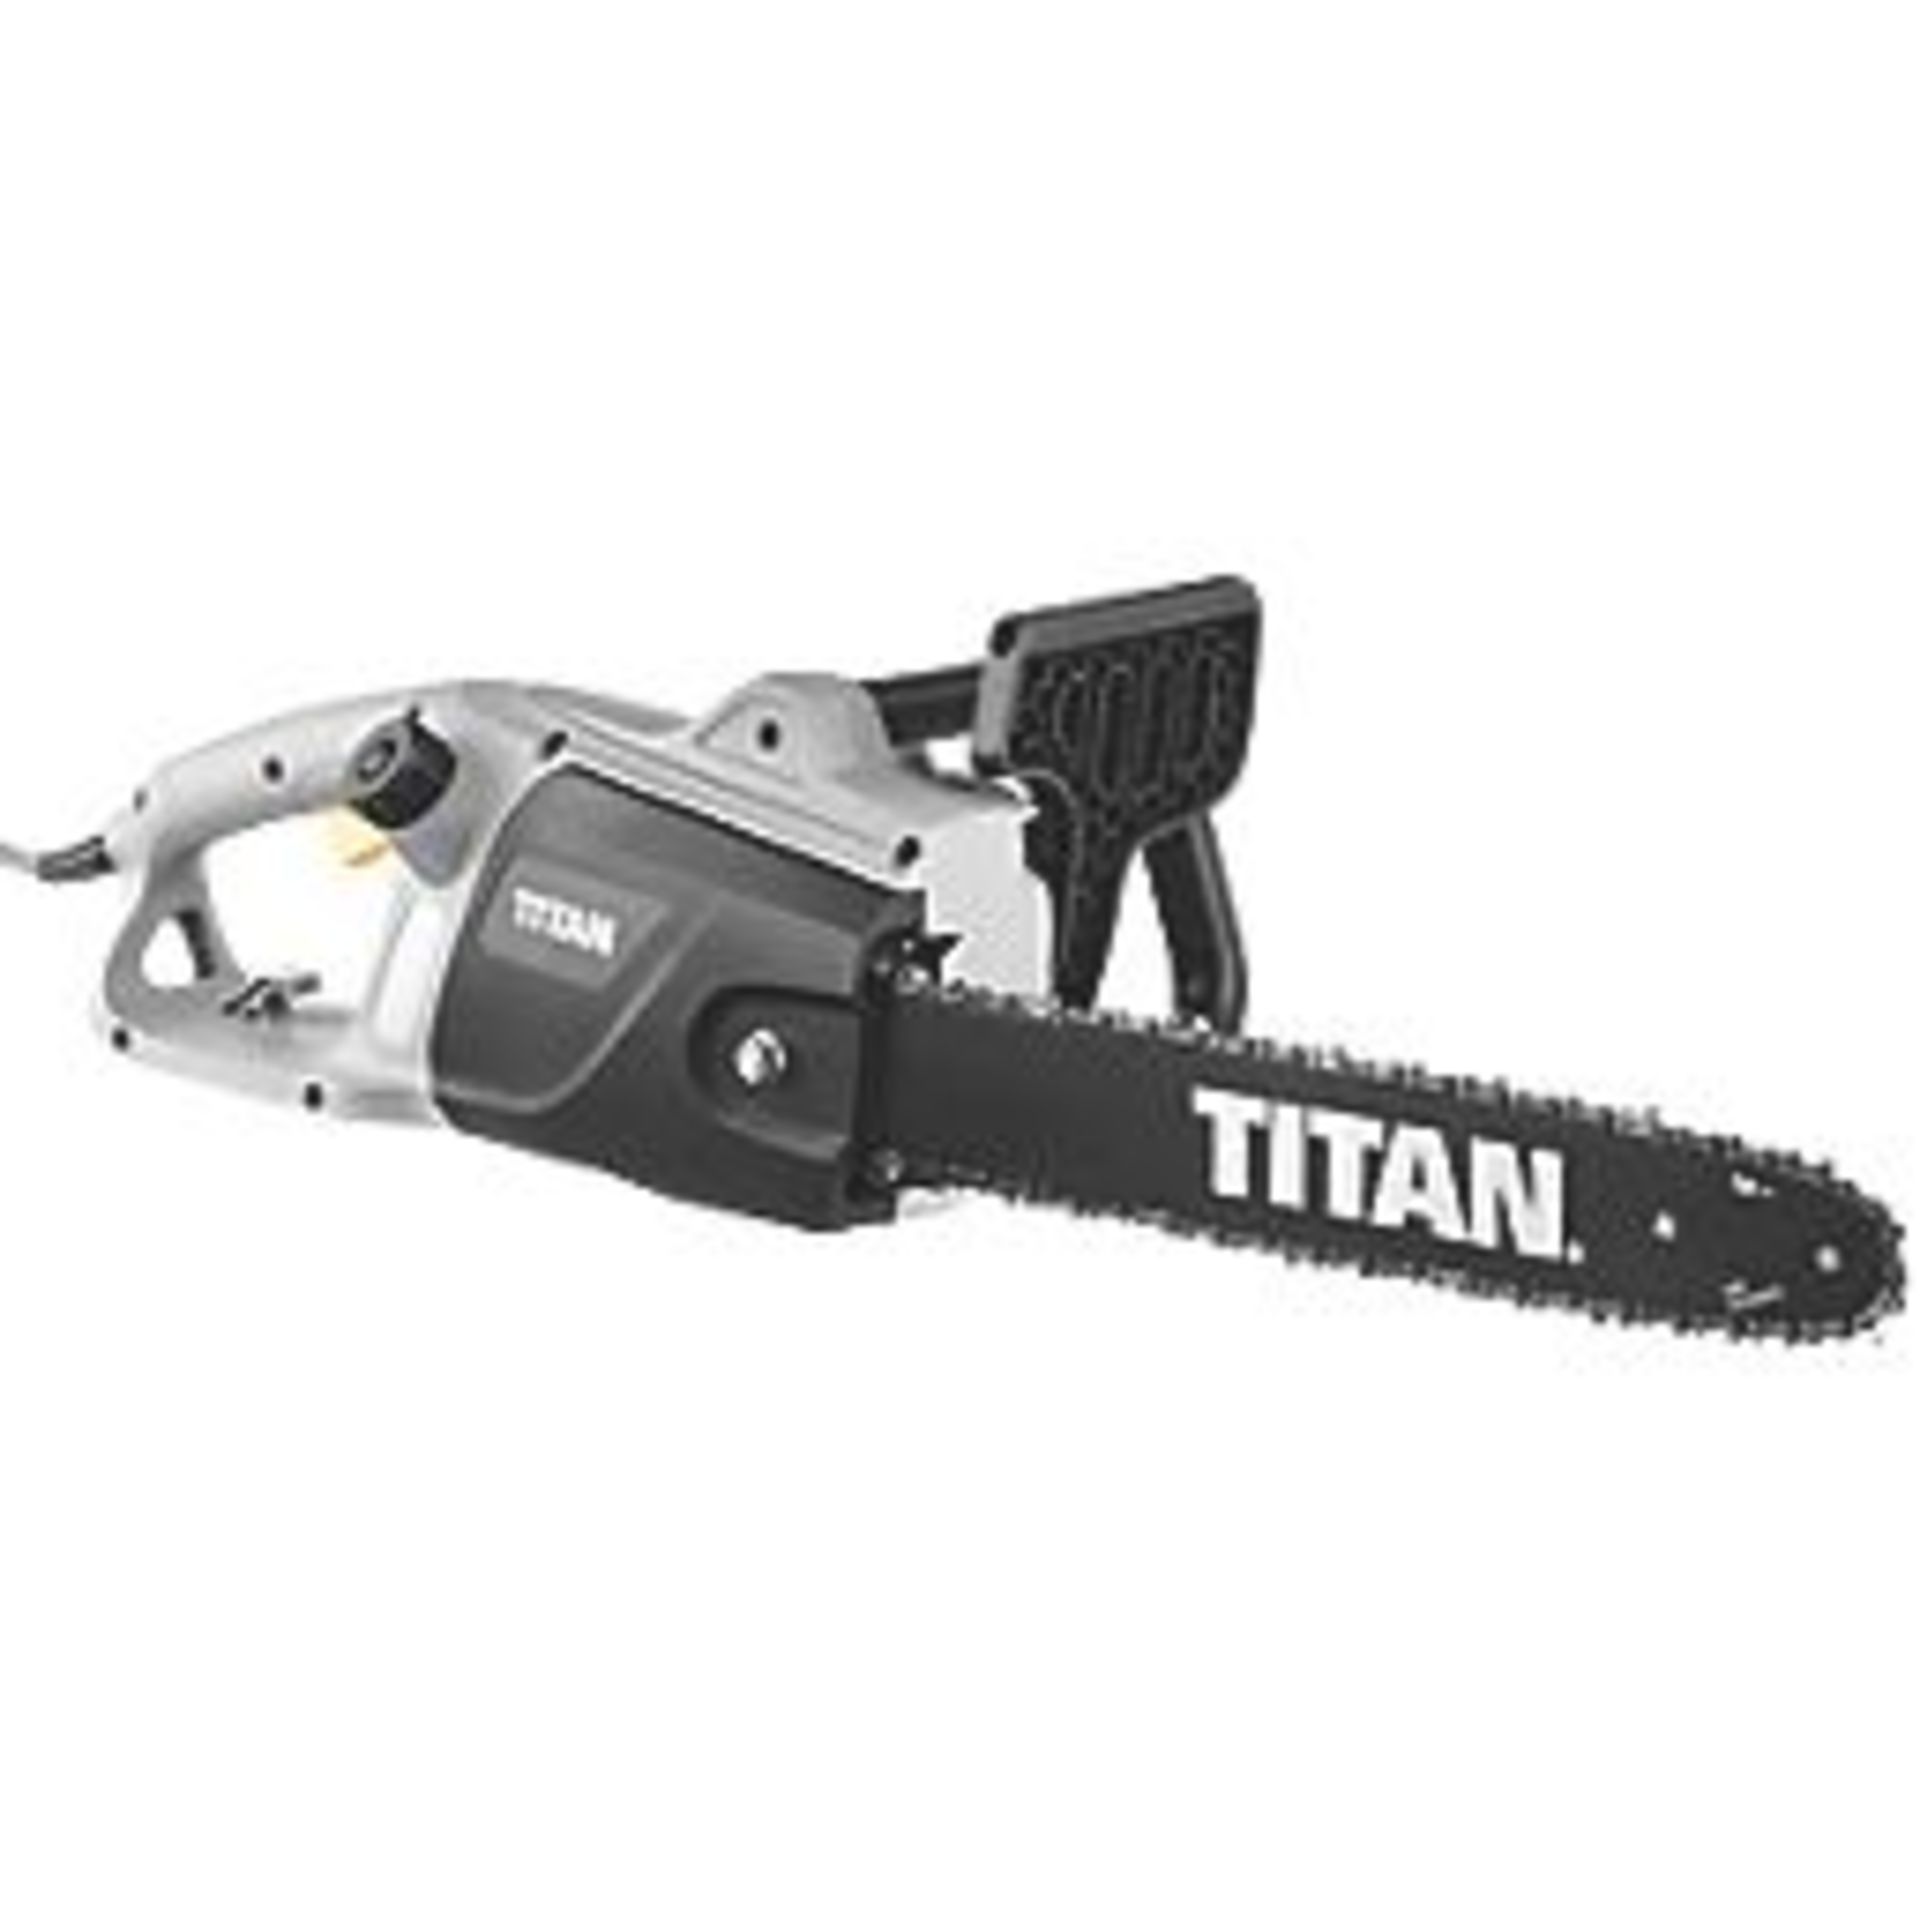 TITAN TTL758CHN 2000W 230V ELECTRIC 40CM CHAINSAW. - P4. Electric chainsaw with powerful motor and